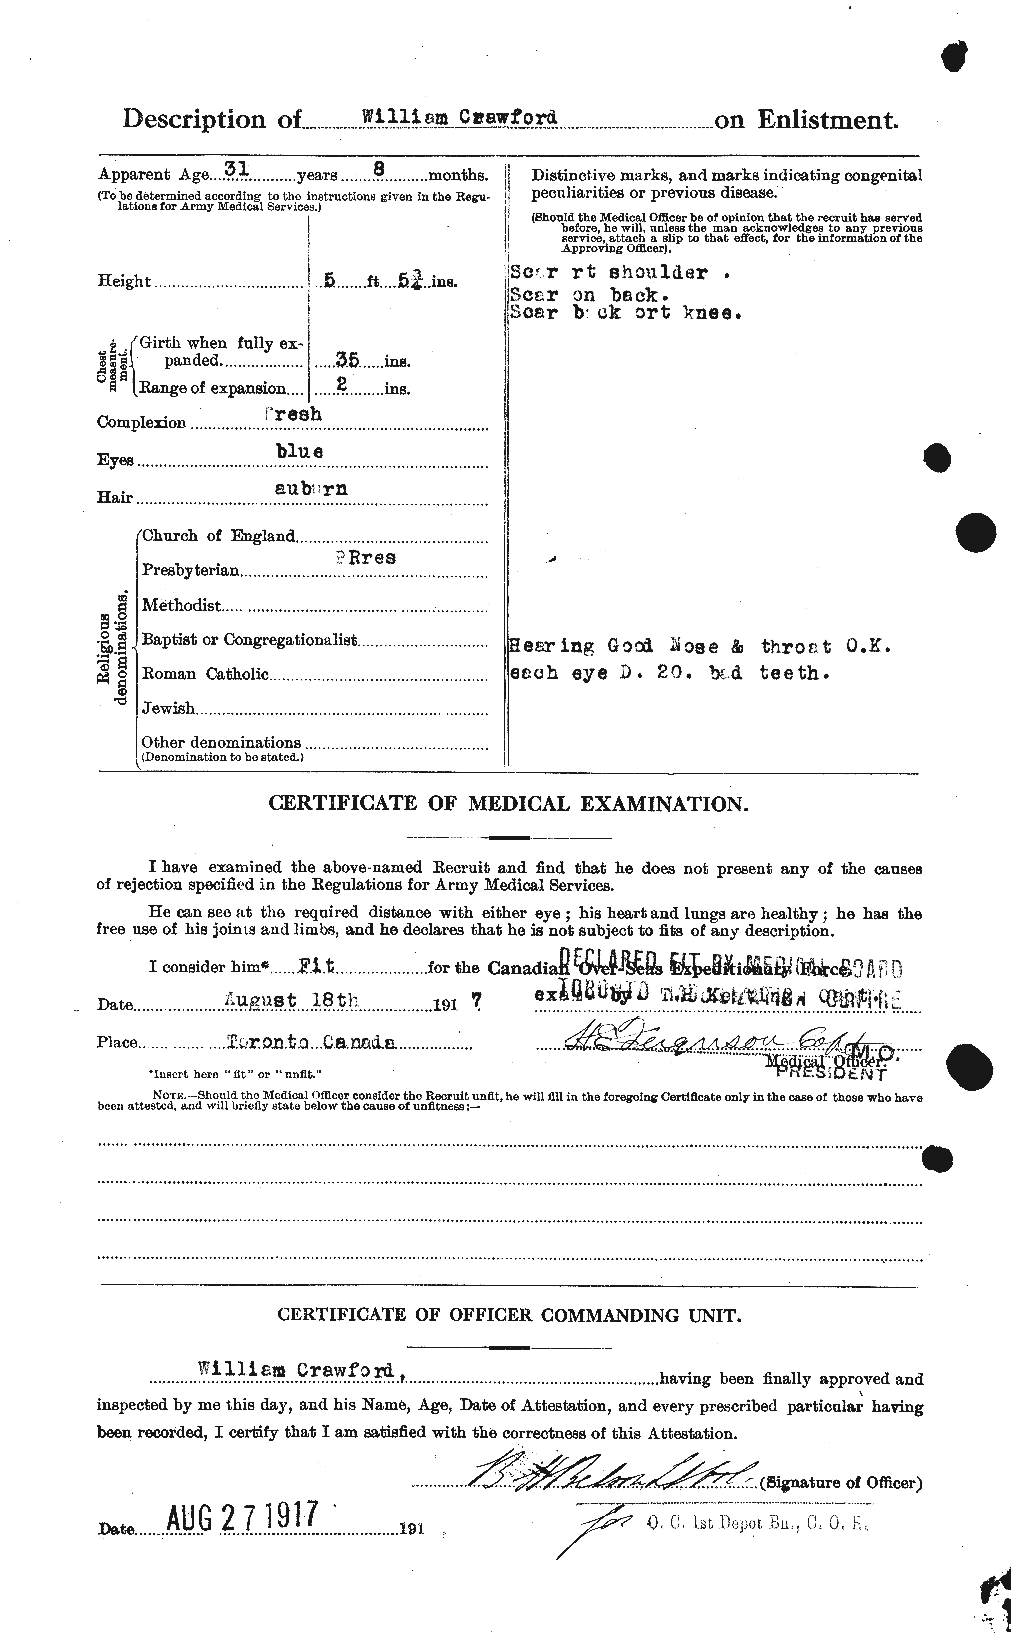 Personnel Records of the First World War - CEF 061158b